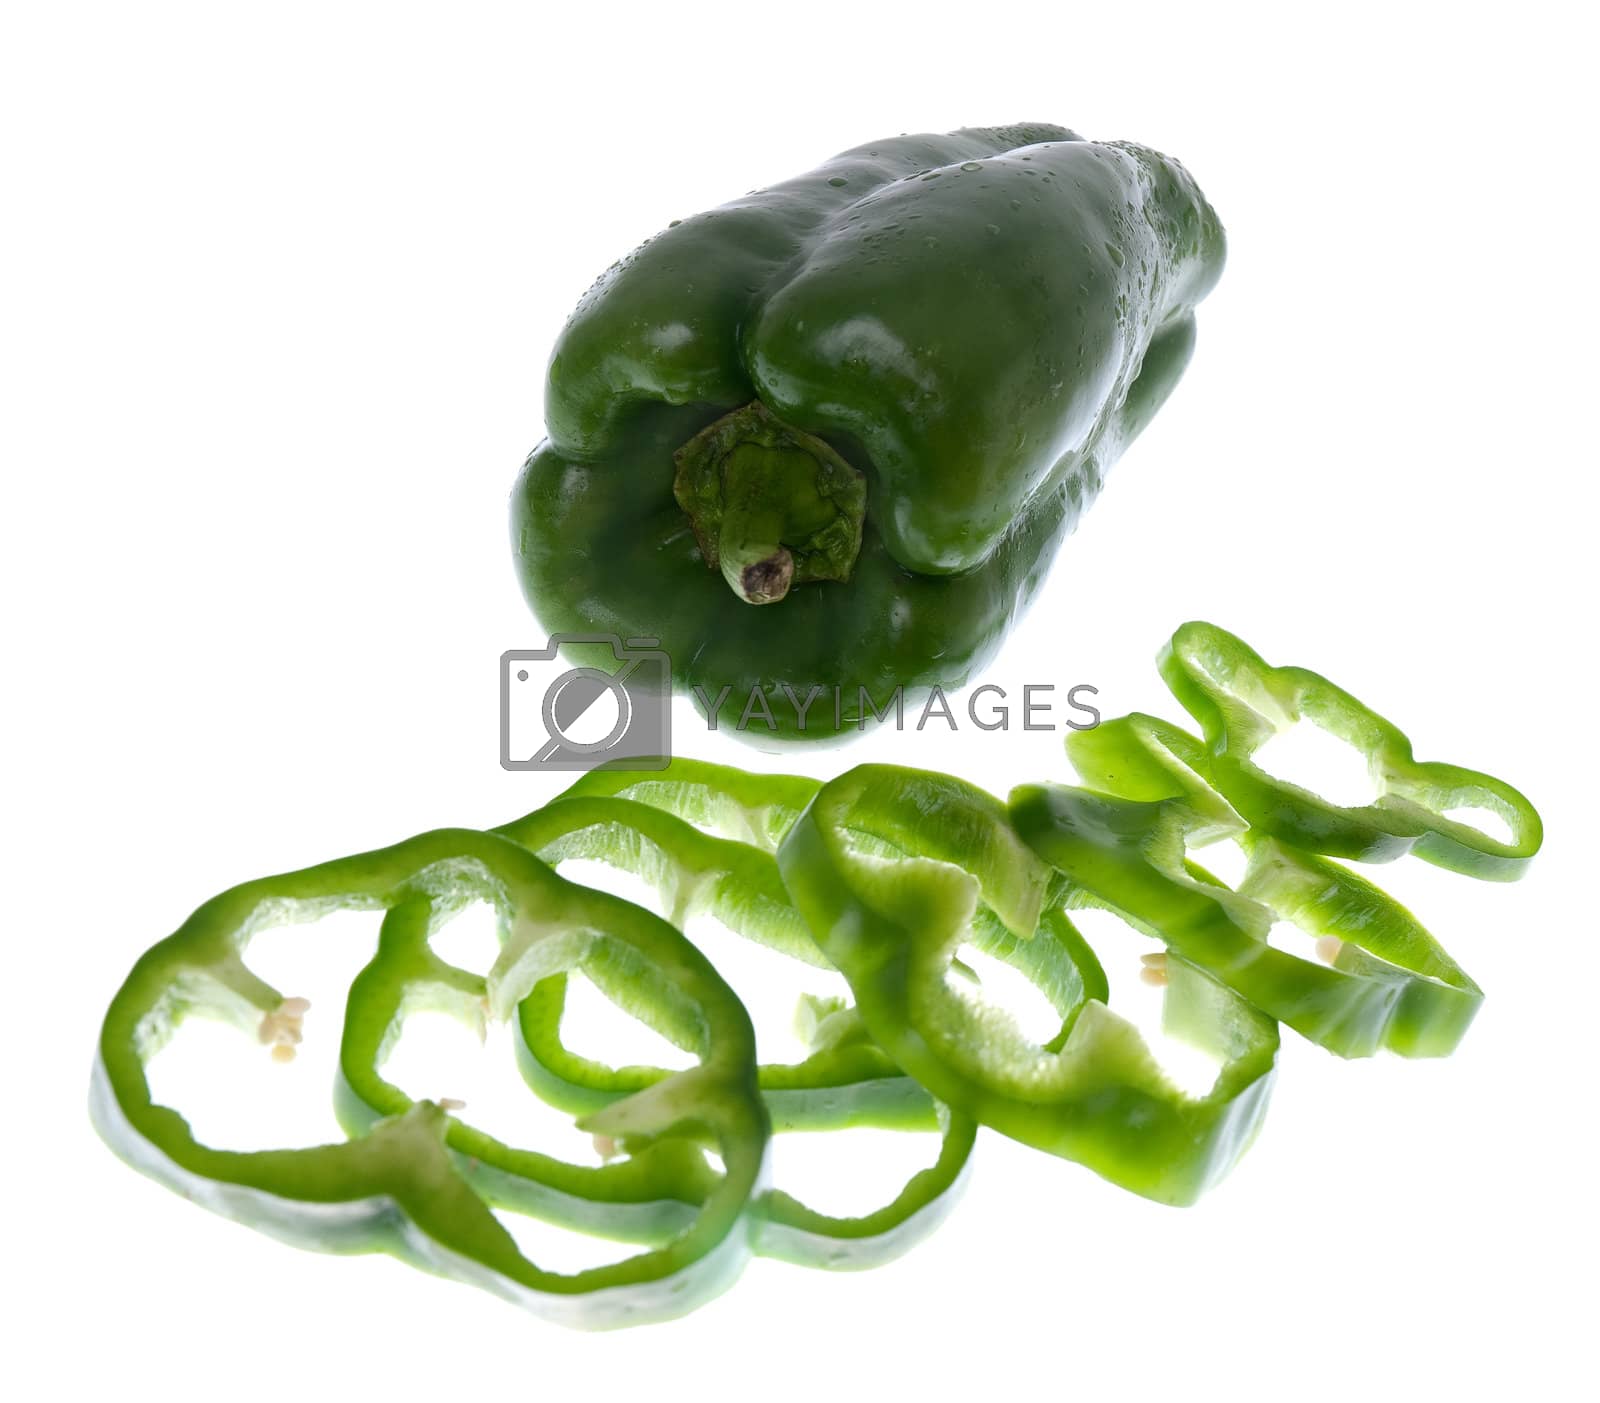 Royalty free image of Green pepper by homydesign